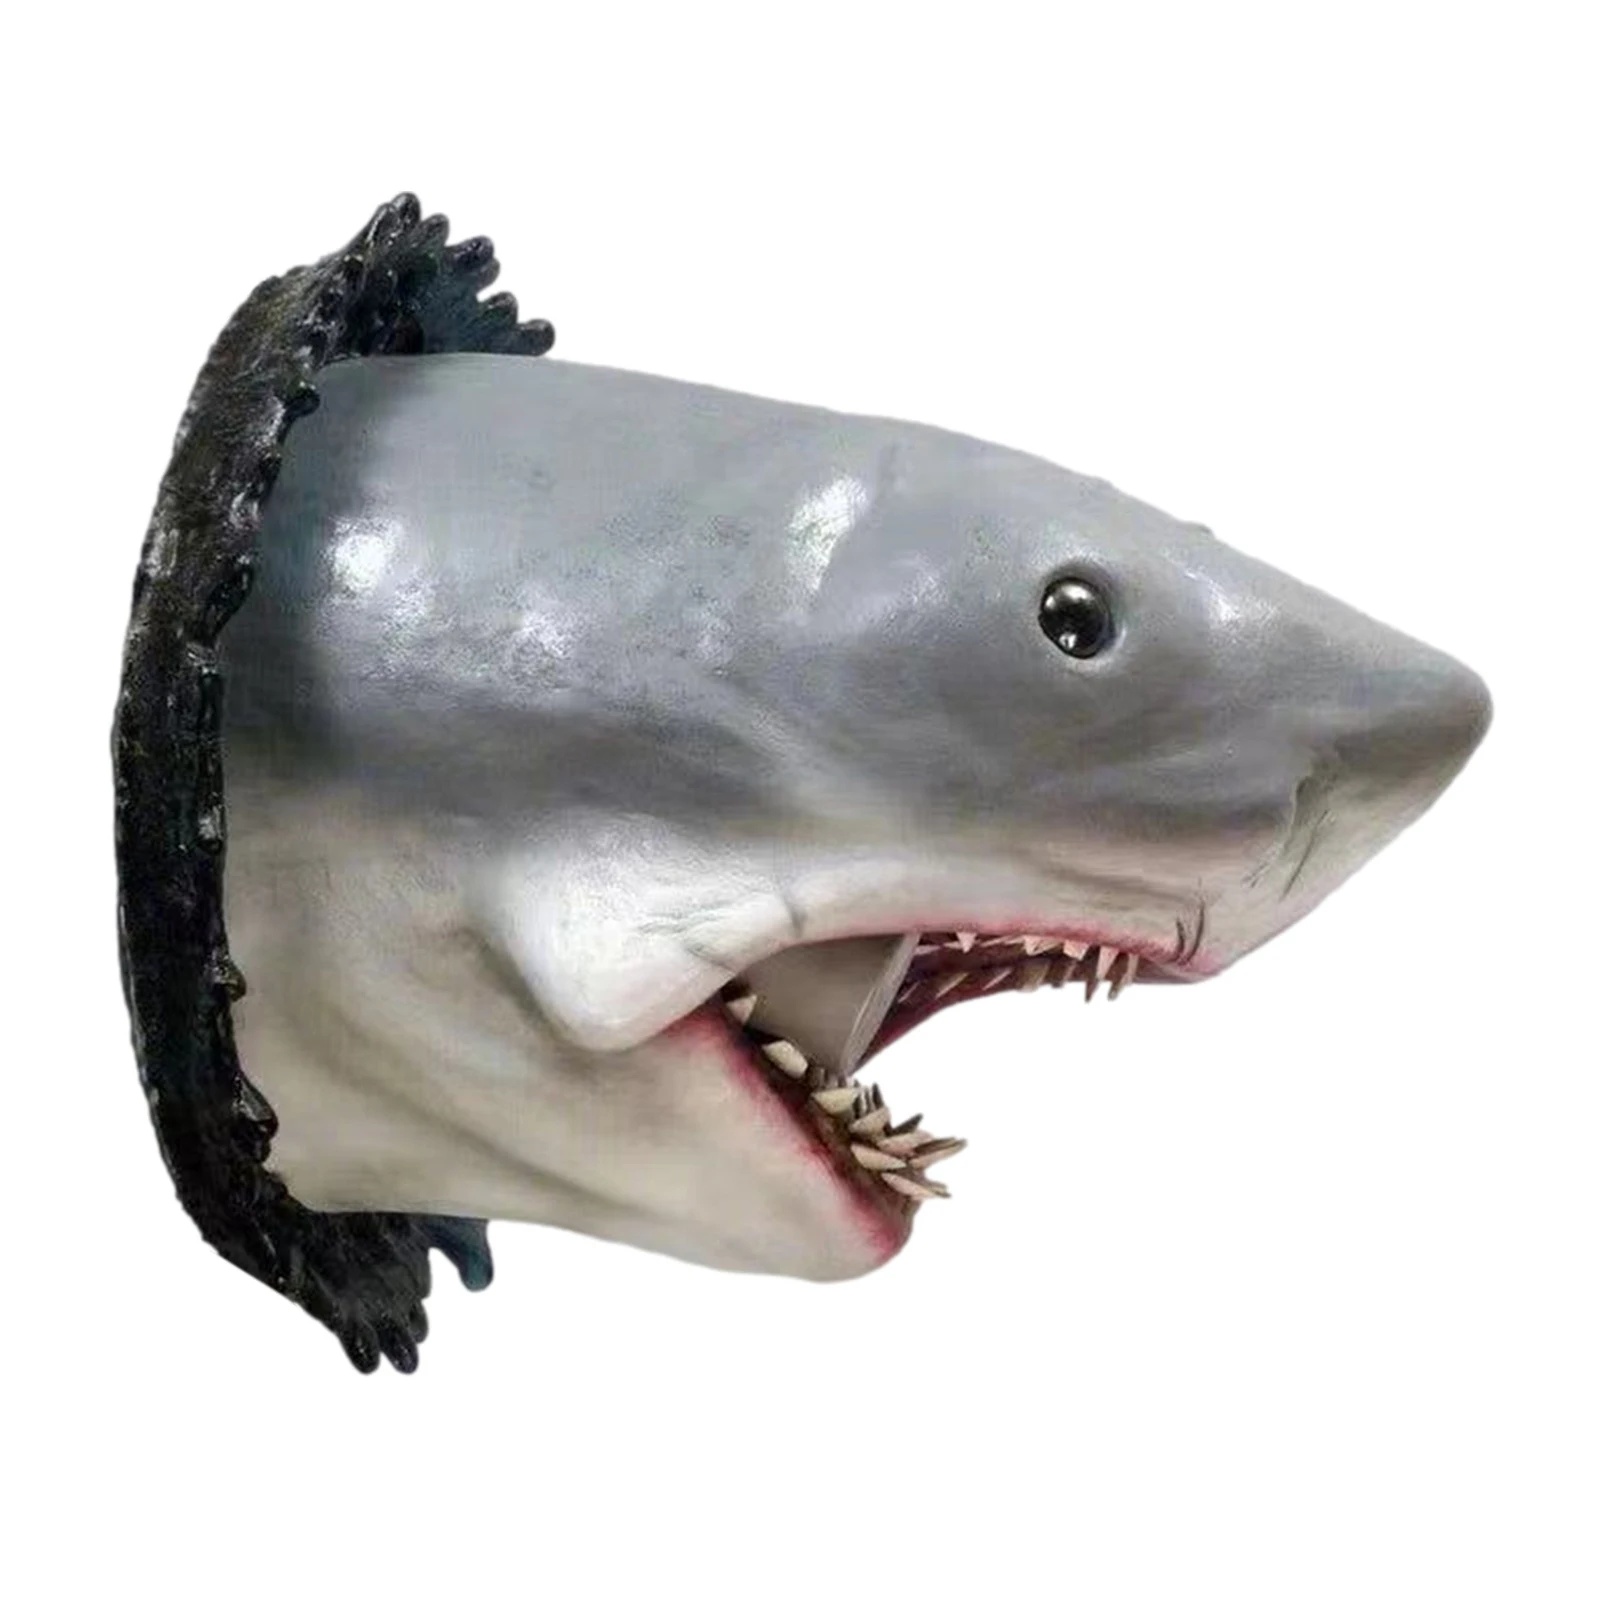 Shark Head Wall Mount Statue Bust Creative Wall Key Wallet Storage Decoration Resin Artwork Room Props Wall Hanging Ornament 